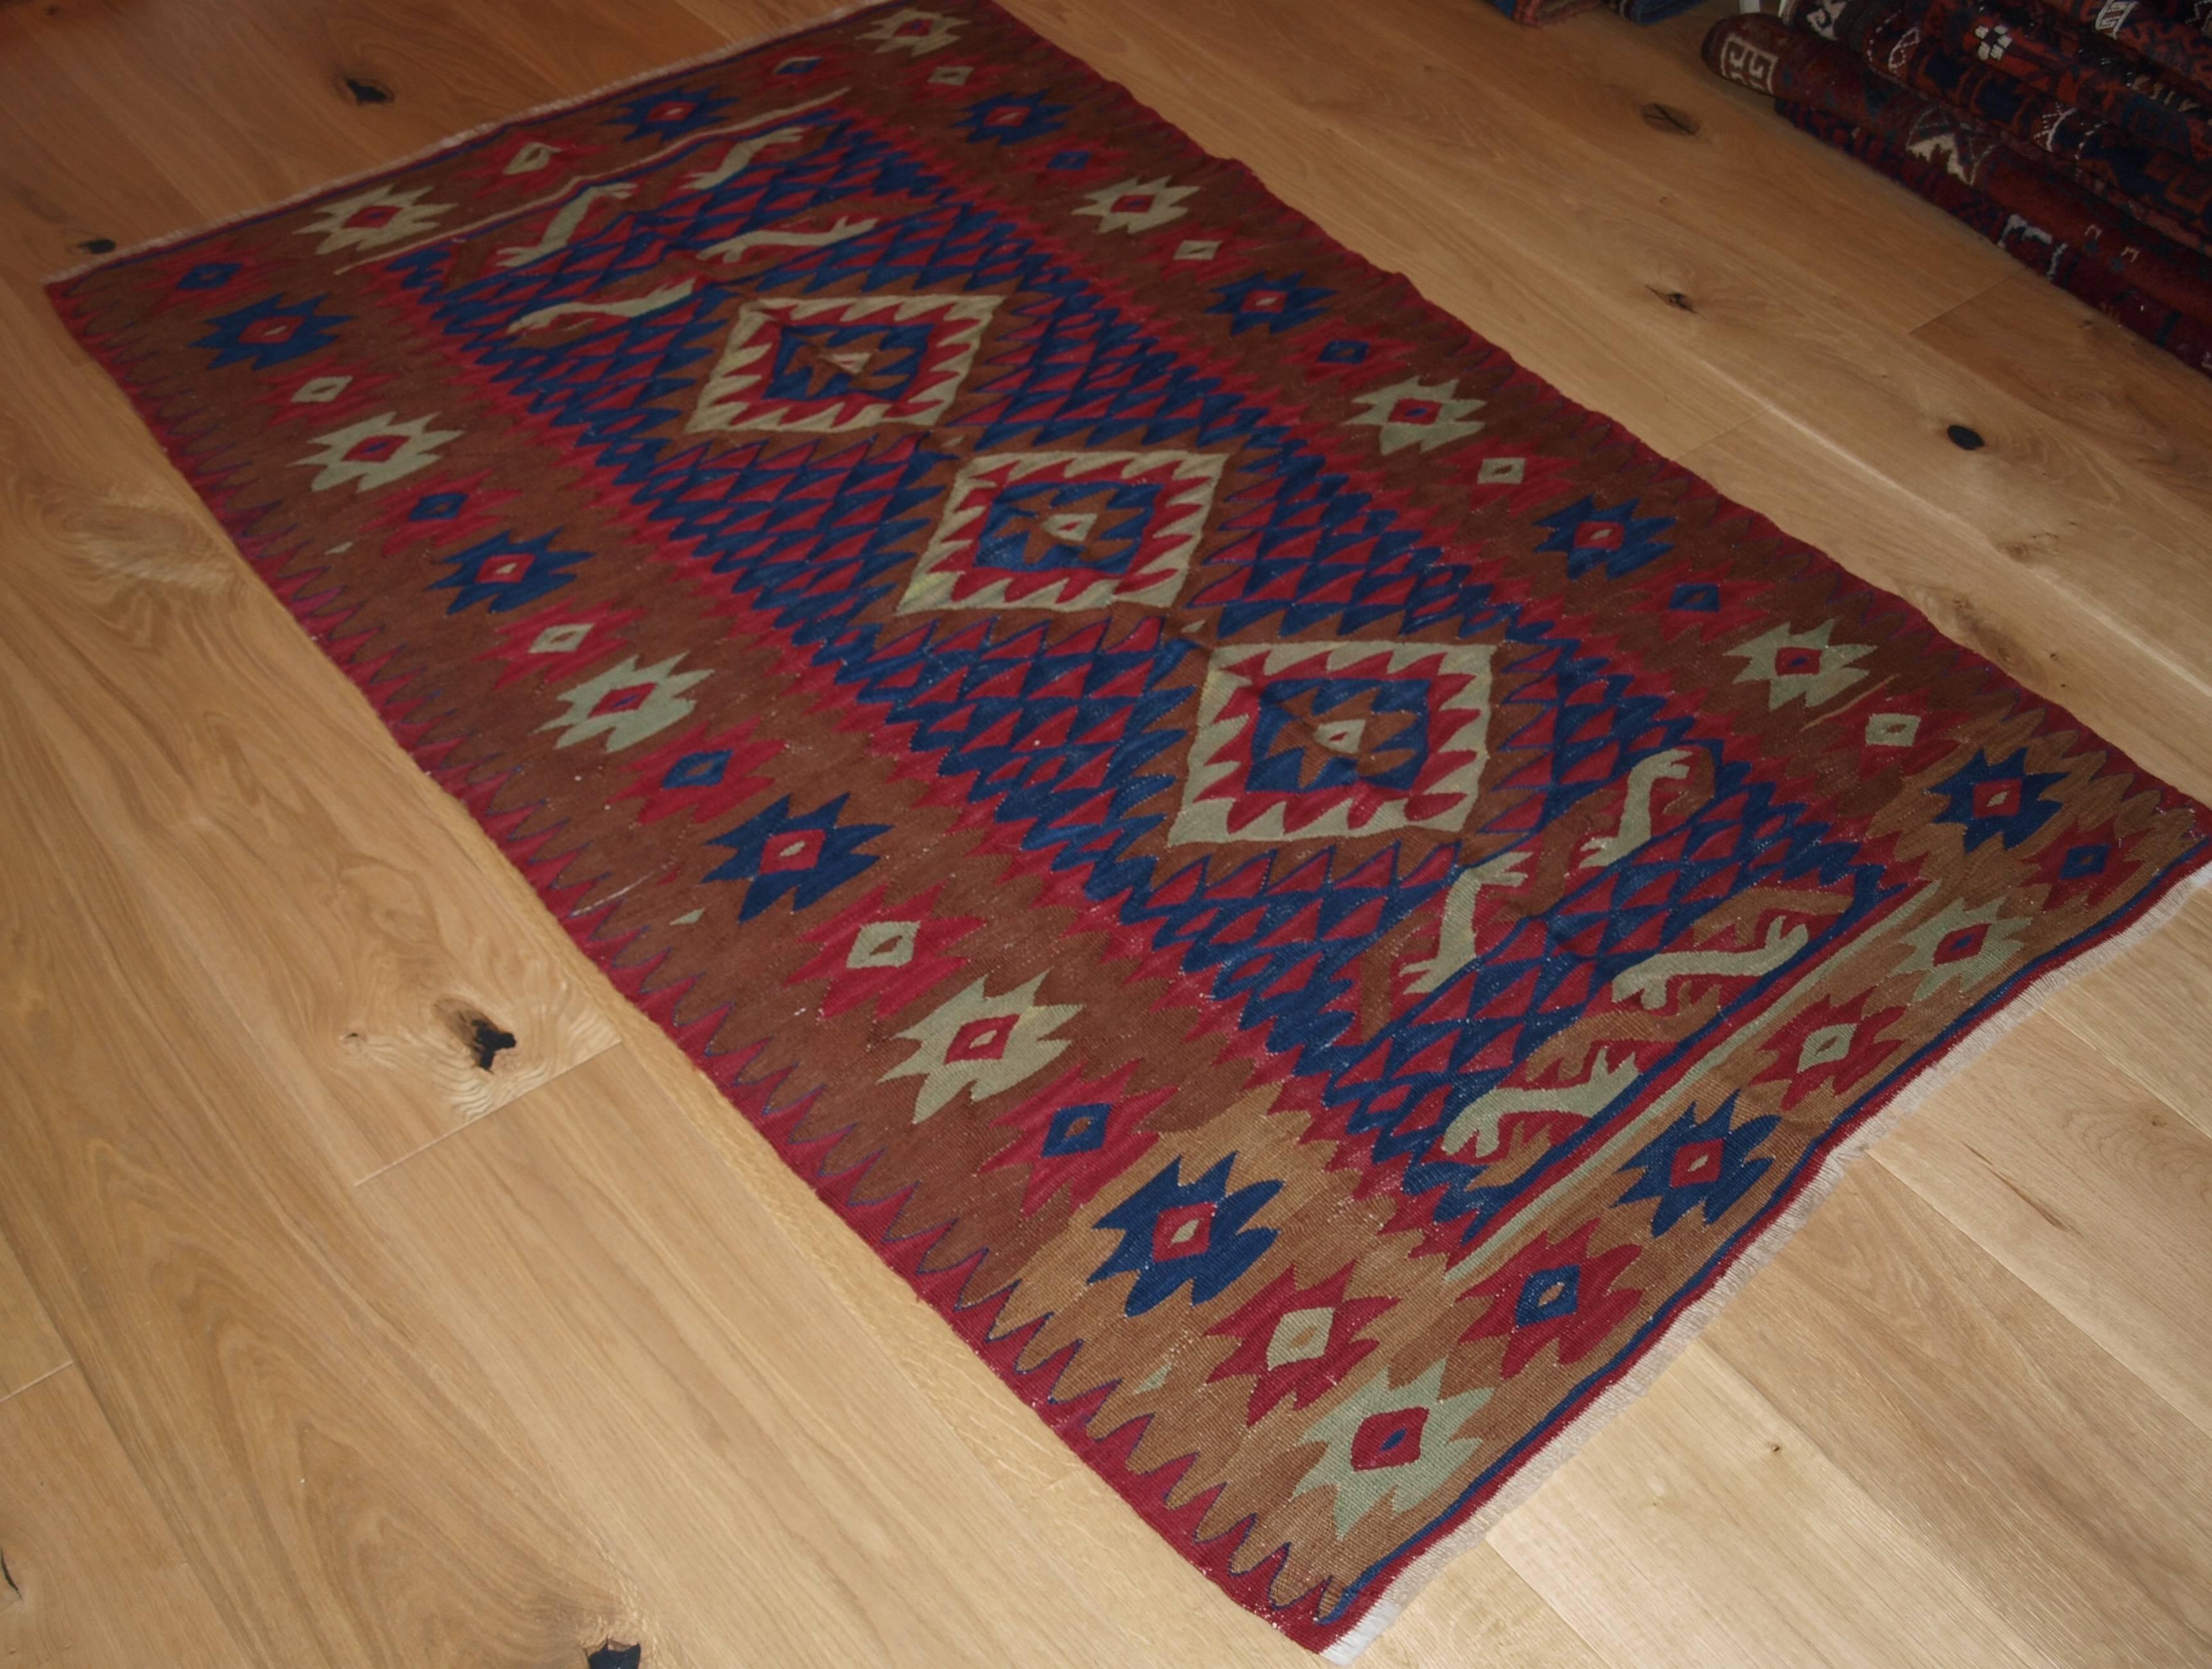 Size: 5ft 1in x 3ft 2in (156 x 97cm).
Old Anatolian Sharkoy kilim, Western Turkey or the Balkans,
circa 1920
Sharkoy kilims are also known as Sarkoy or Thracian, they originate from Western Turkey or the region known as European Turkey or The